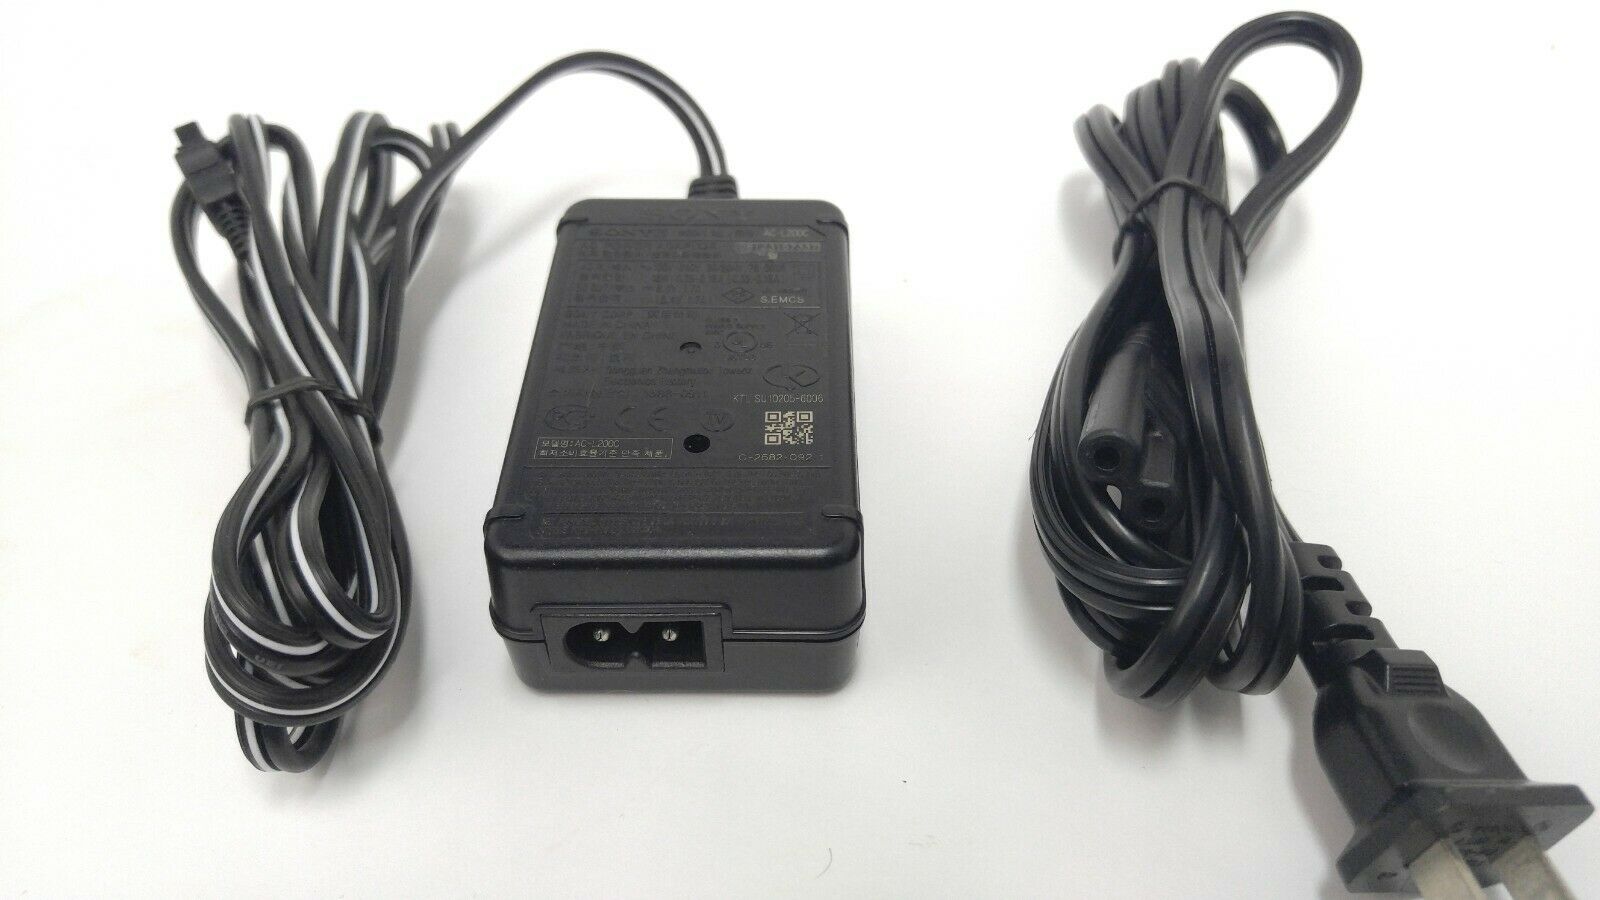 AC-L200C Sony AC Adapter for Handycam DSC-HX100V - Click Image to Close